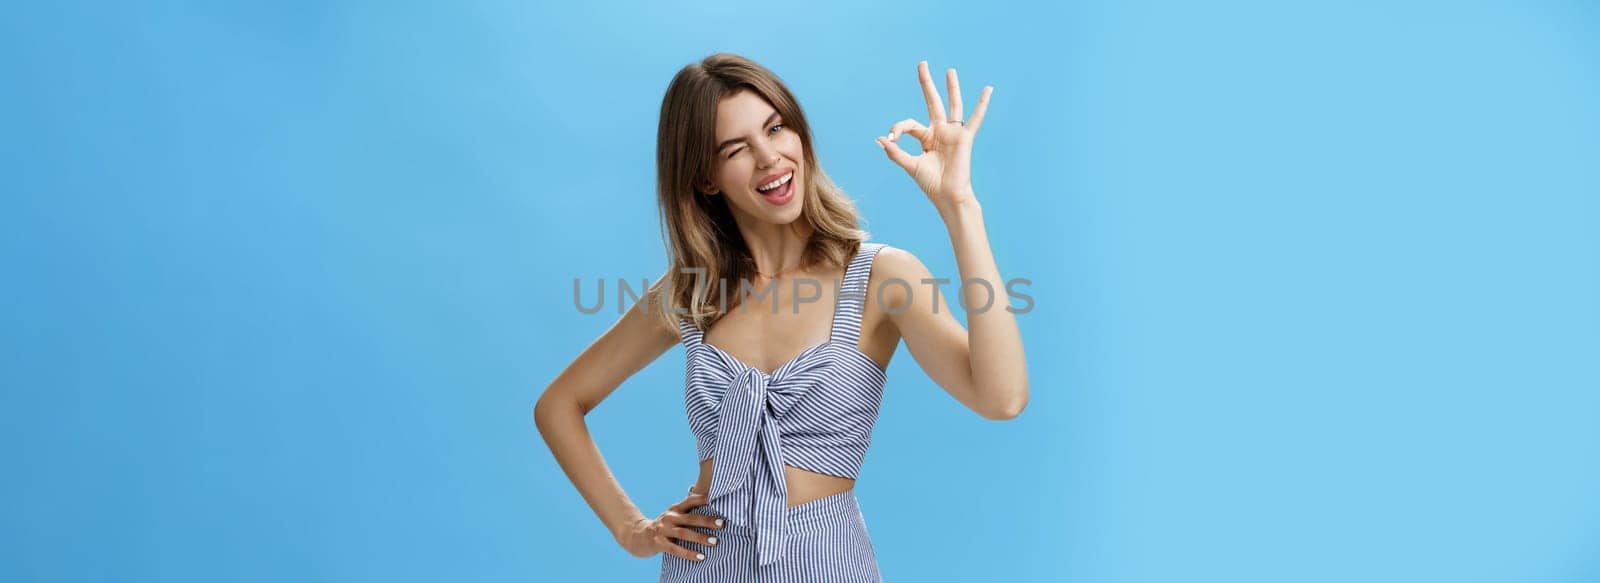 Cute charismatic woman with gap teeth showing okay gesture tilting head joyfully, holding hand on waist and winking with self-assured expression reassuring friend everything goes on plan. Body language concept